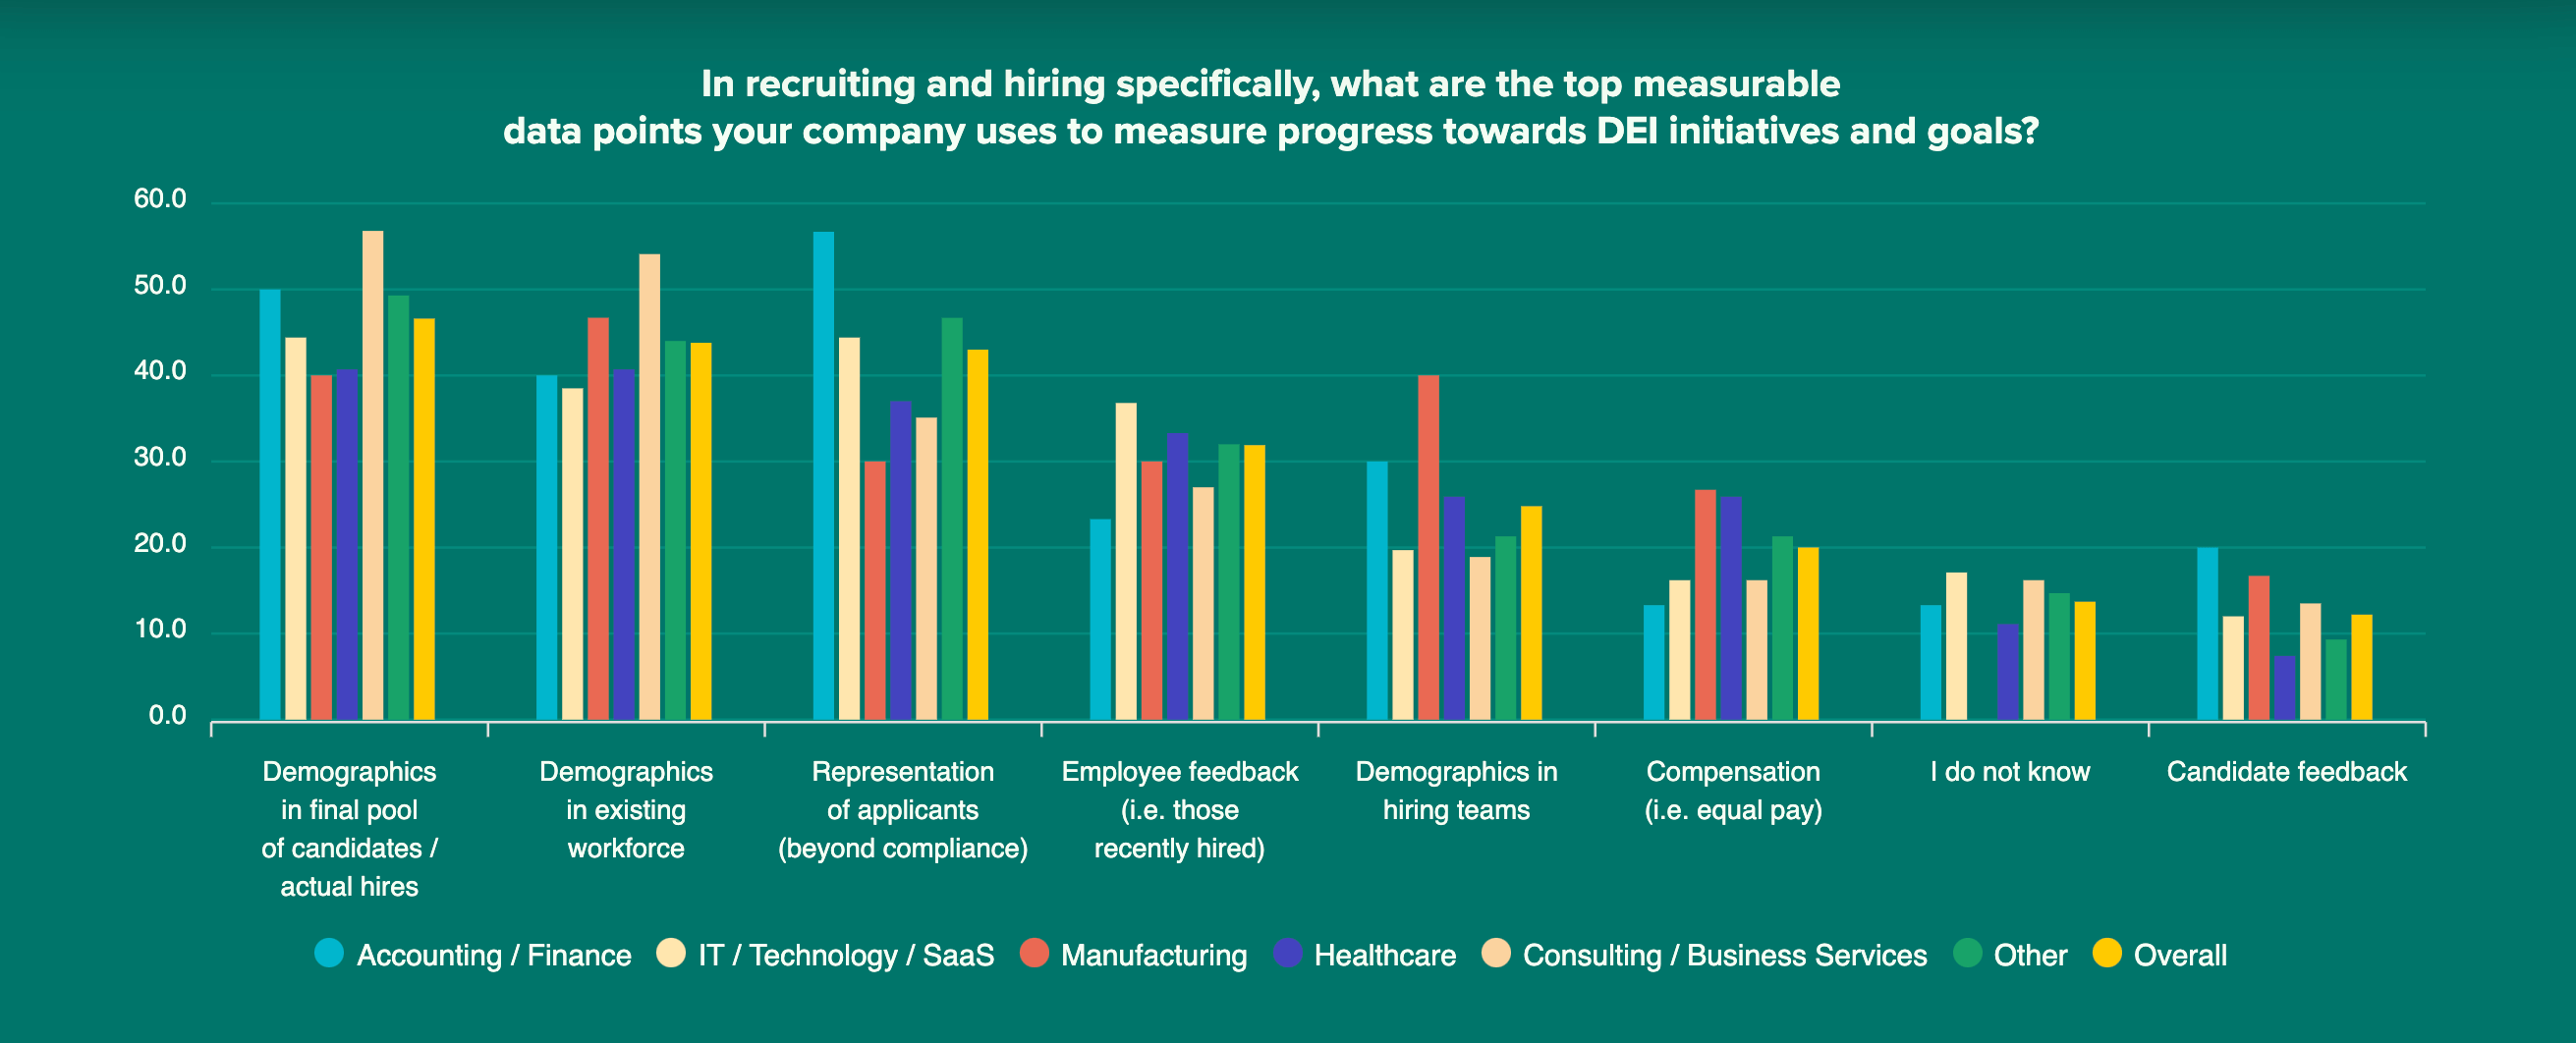 In recruiting and hiring specifically, what are the top measurable data points your company uses to measure progress towards DEI initiatives and goals_